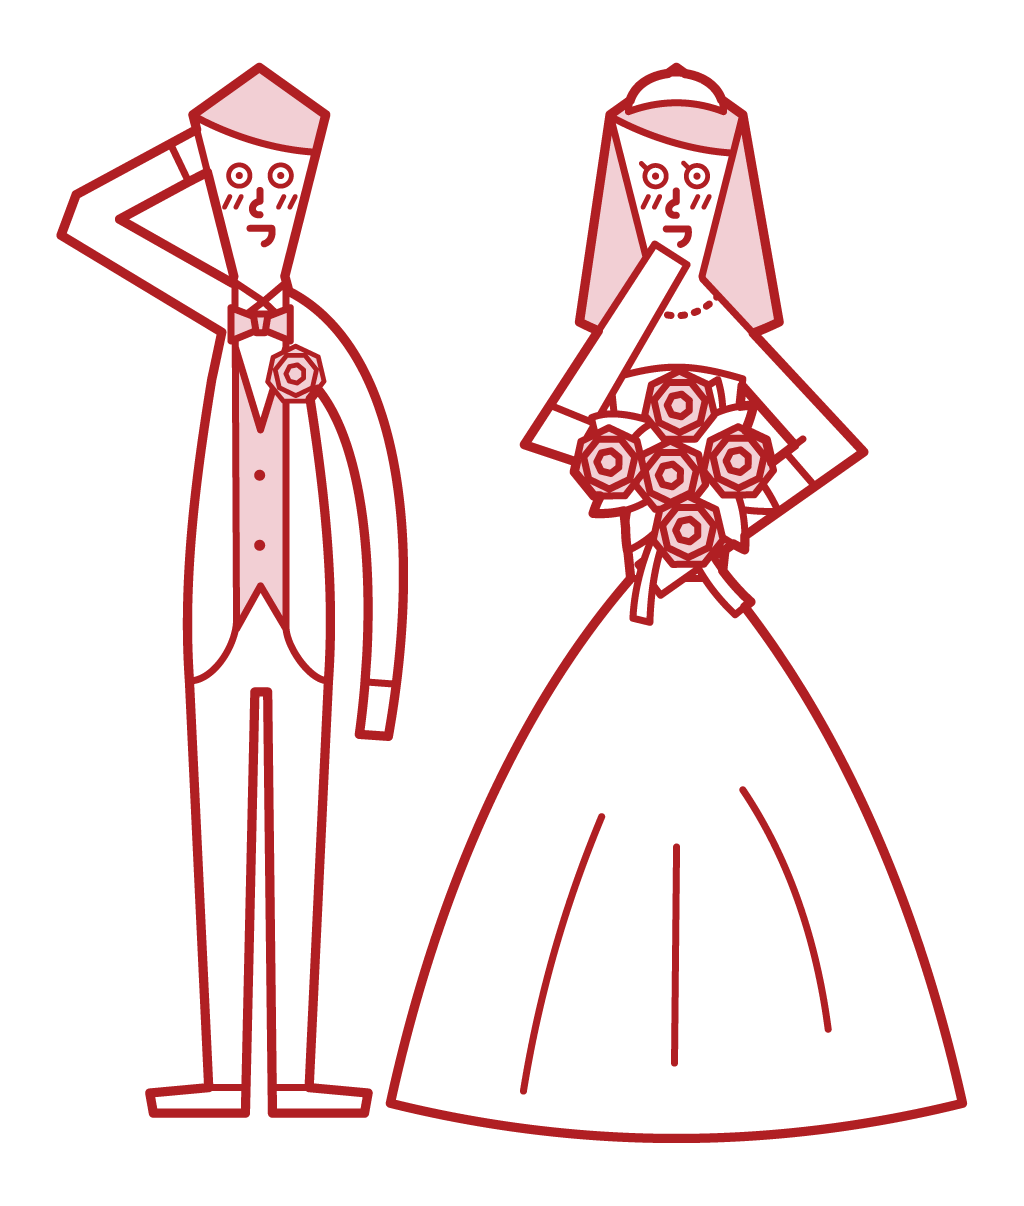 Illustration of a bright bride and groom